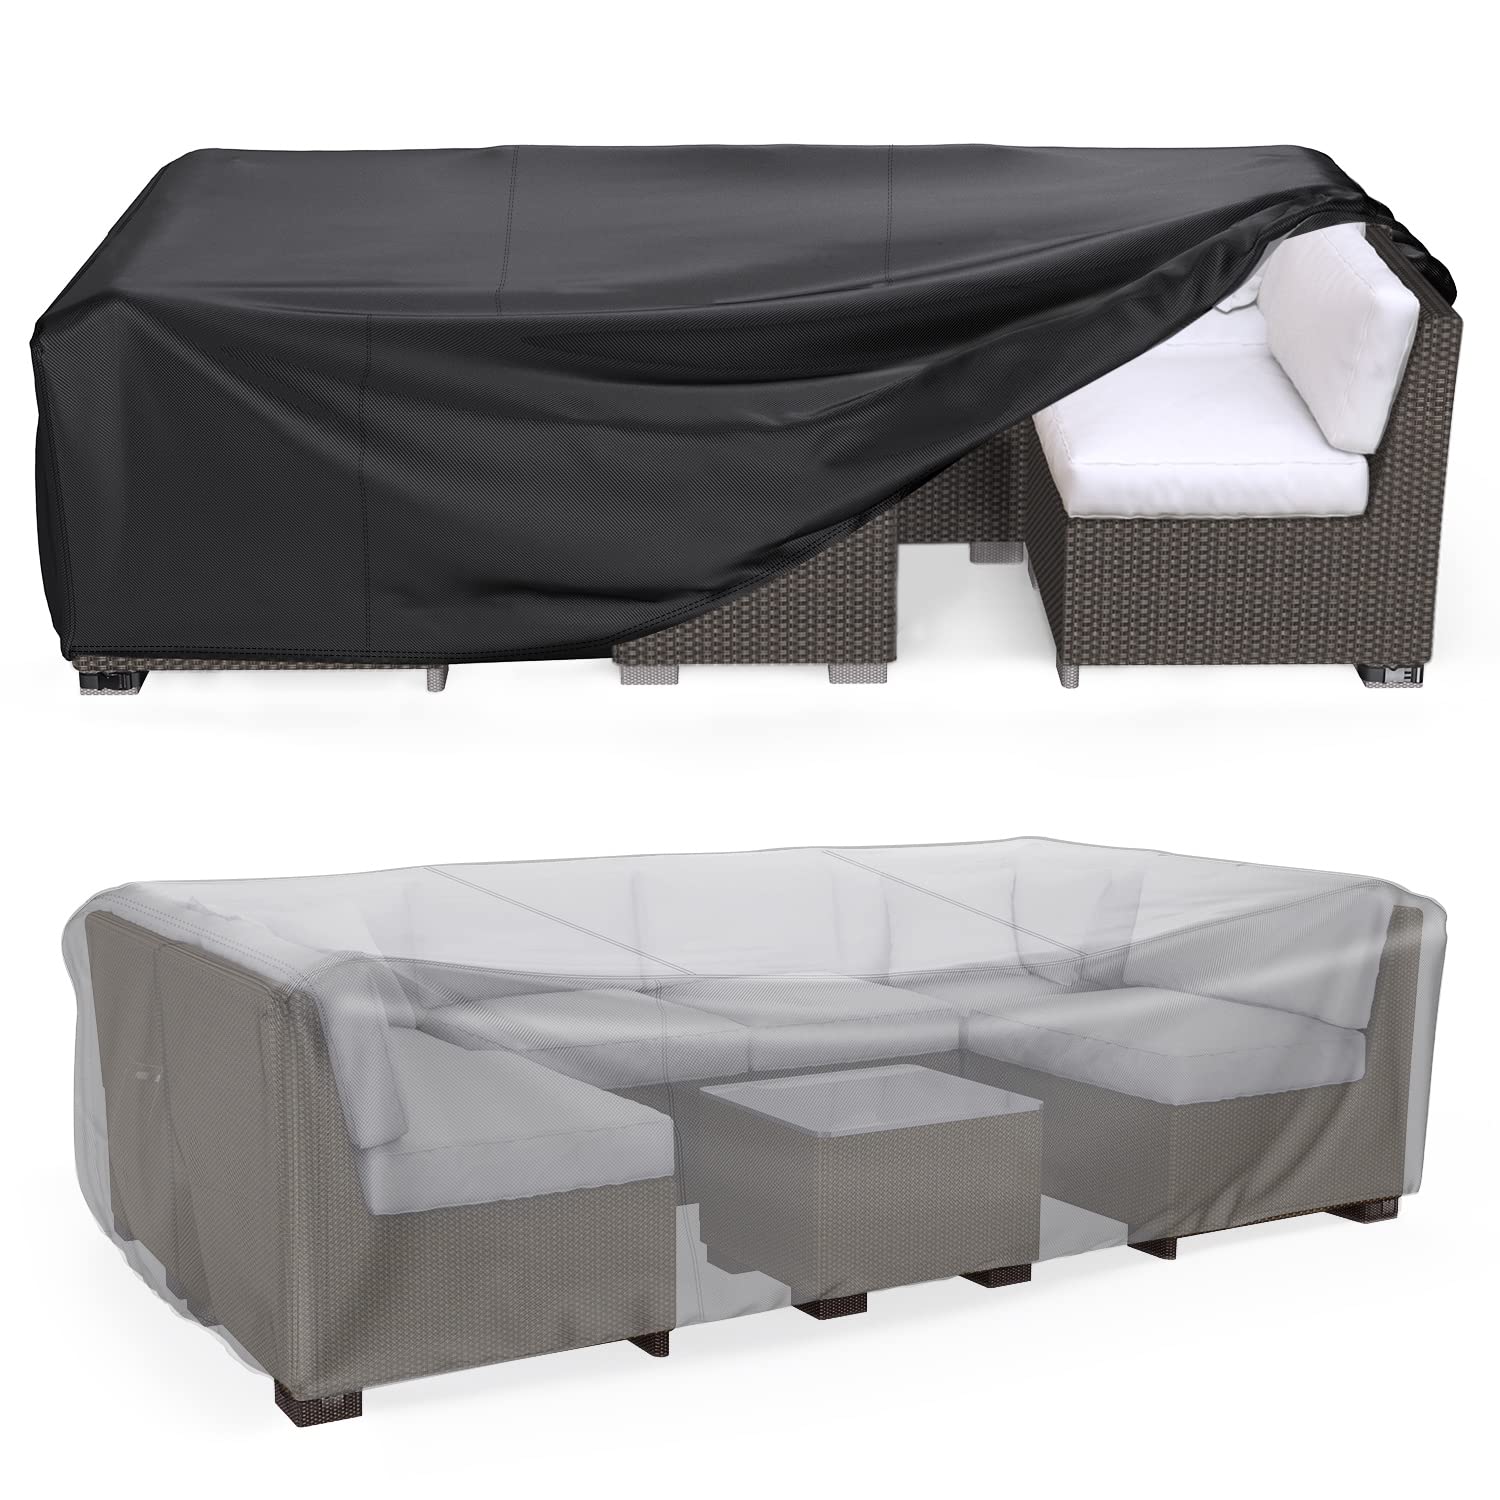 what-to-do-with-patio-furniture-cover